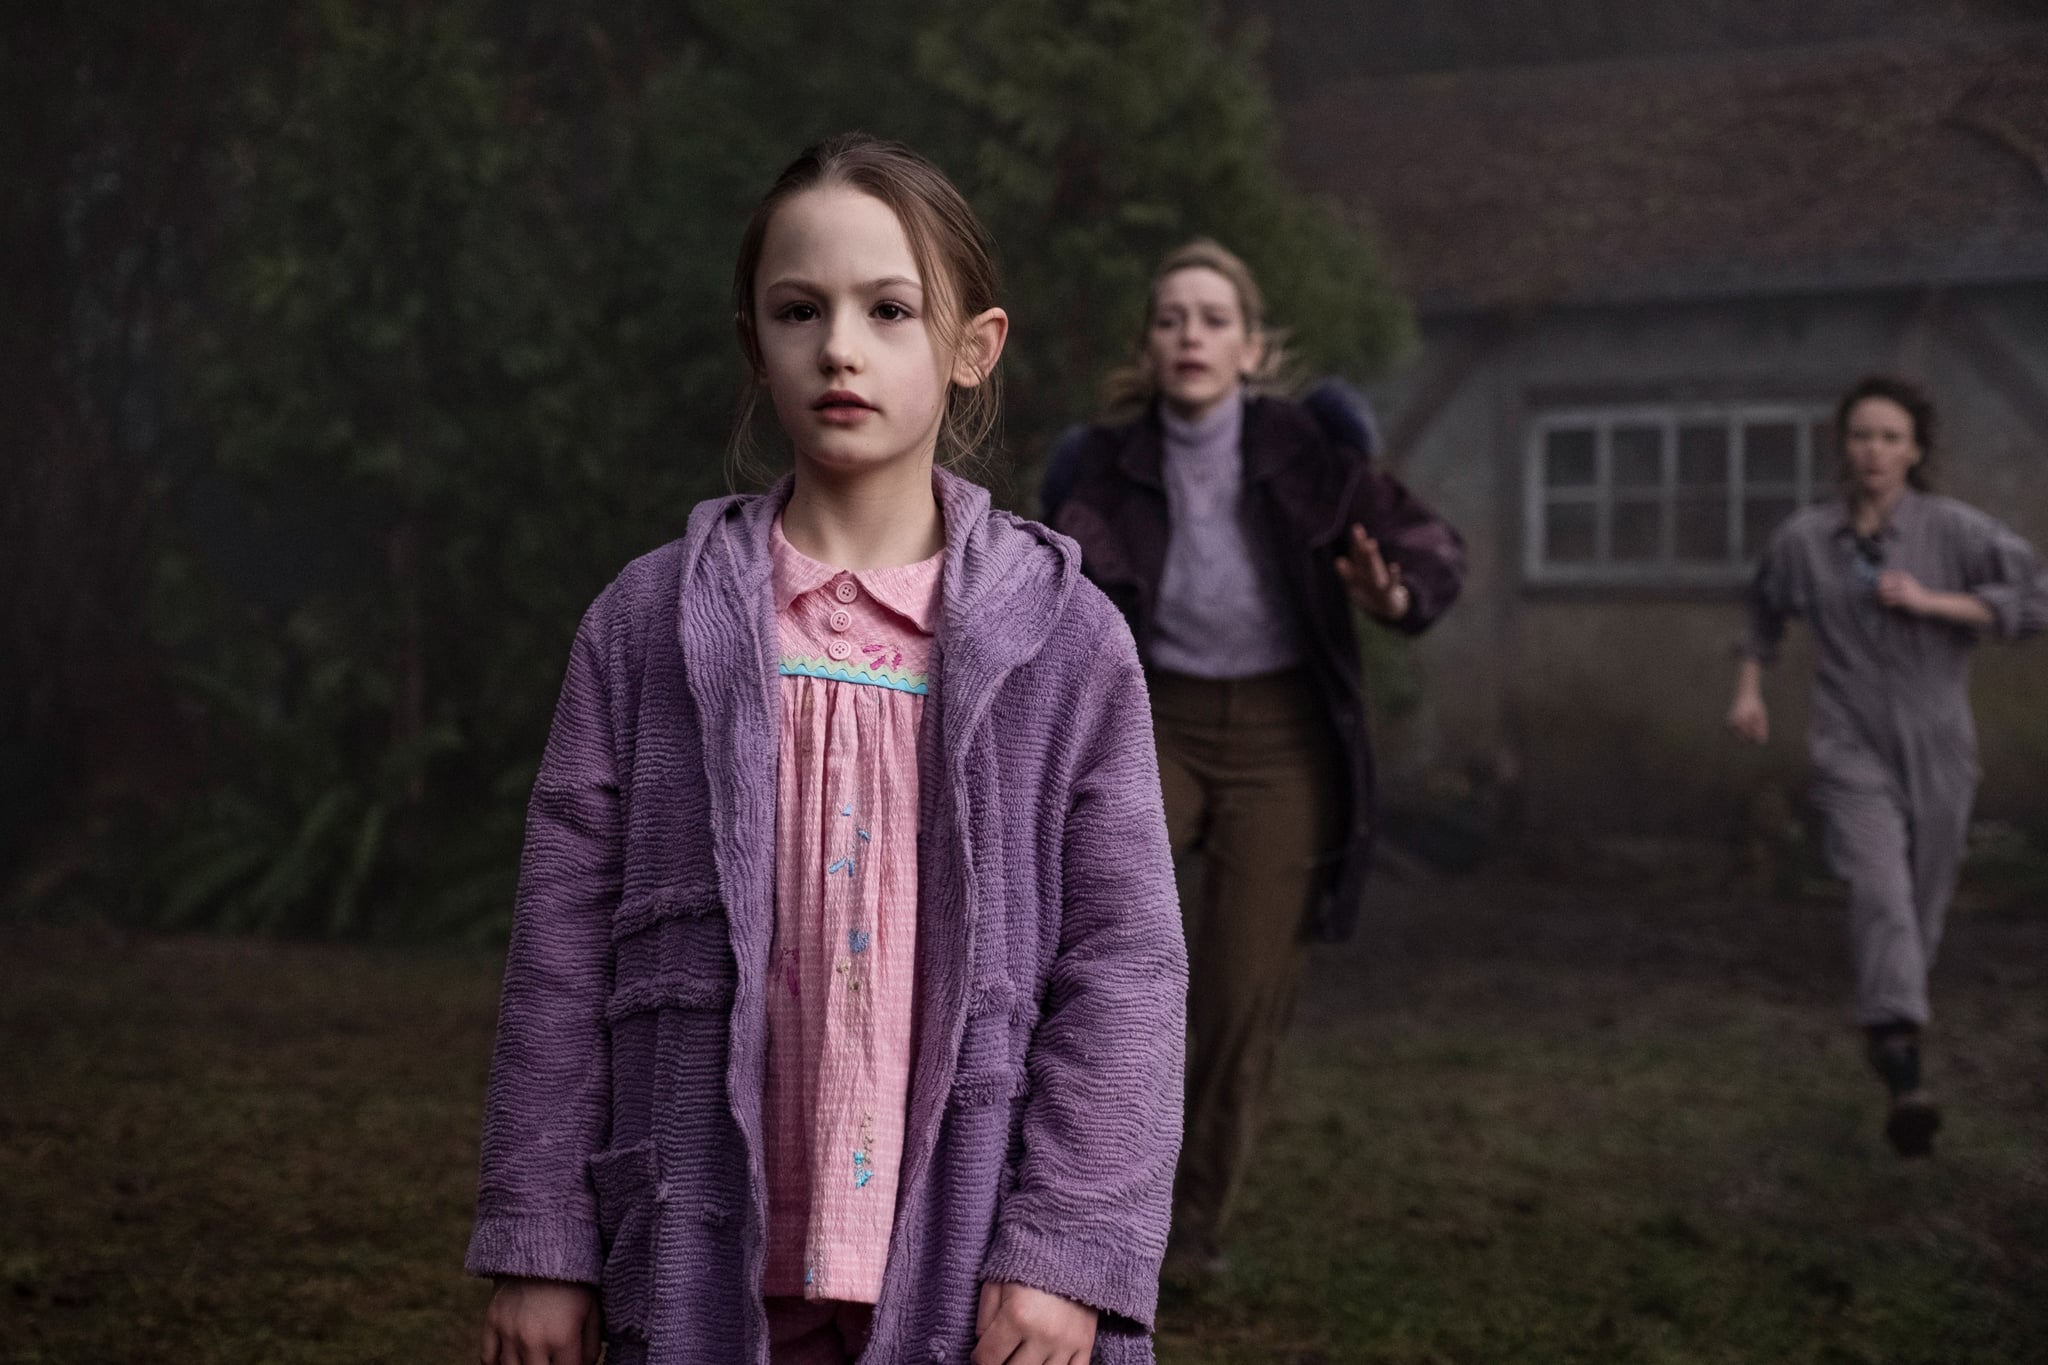 THE HAUNTING OF BLY MANOR, from left: Amelie Bea Smith, Victoria Pedretti, Amelia Eve, (Season 1, ep. 106, aired Oct. 9, 2020). photo: Eike Schroter / Netflix / Courtesy Everett Collection